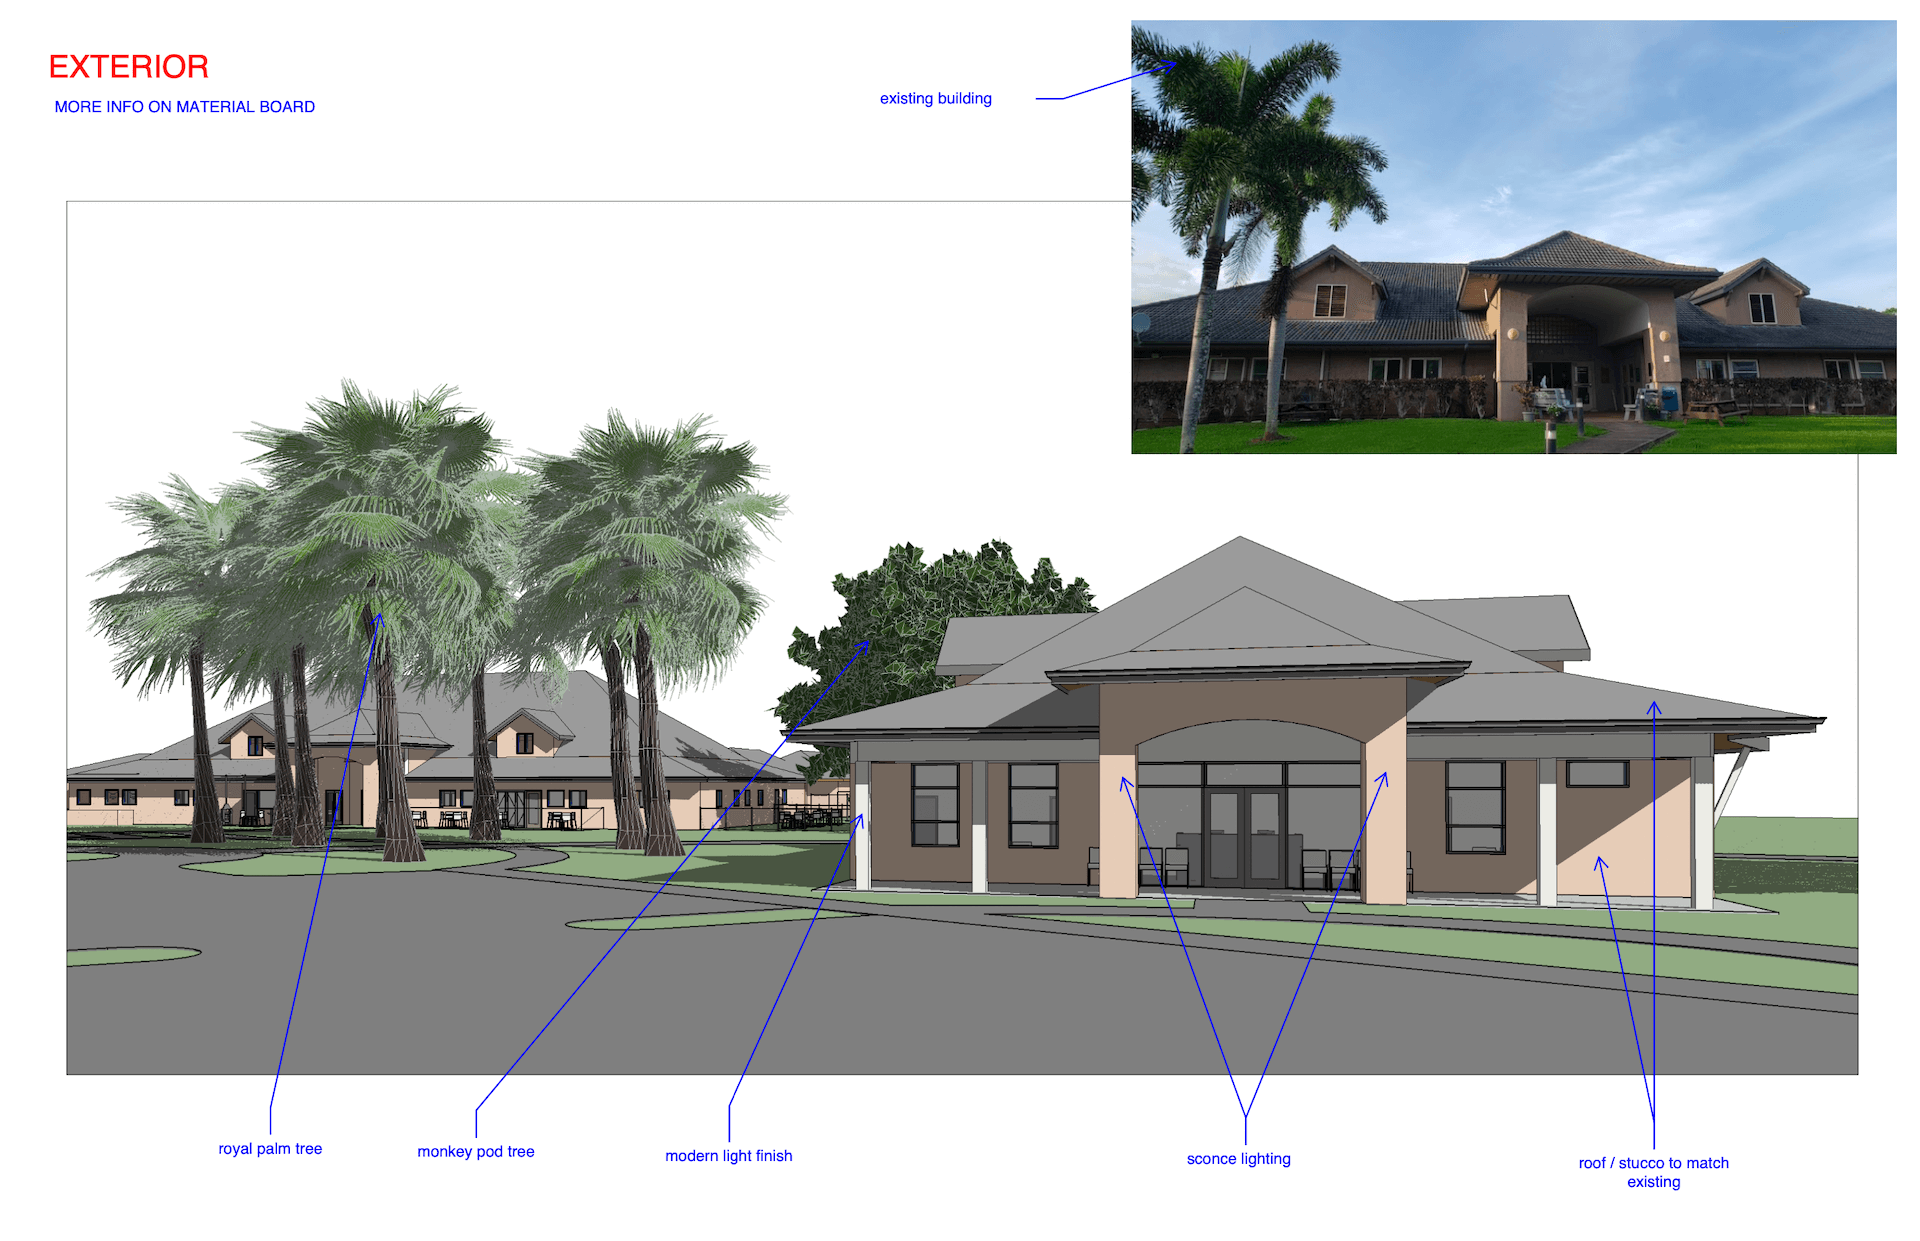 Existing Building Photo and Notes for 3D Rendering